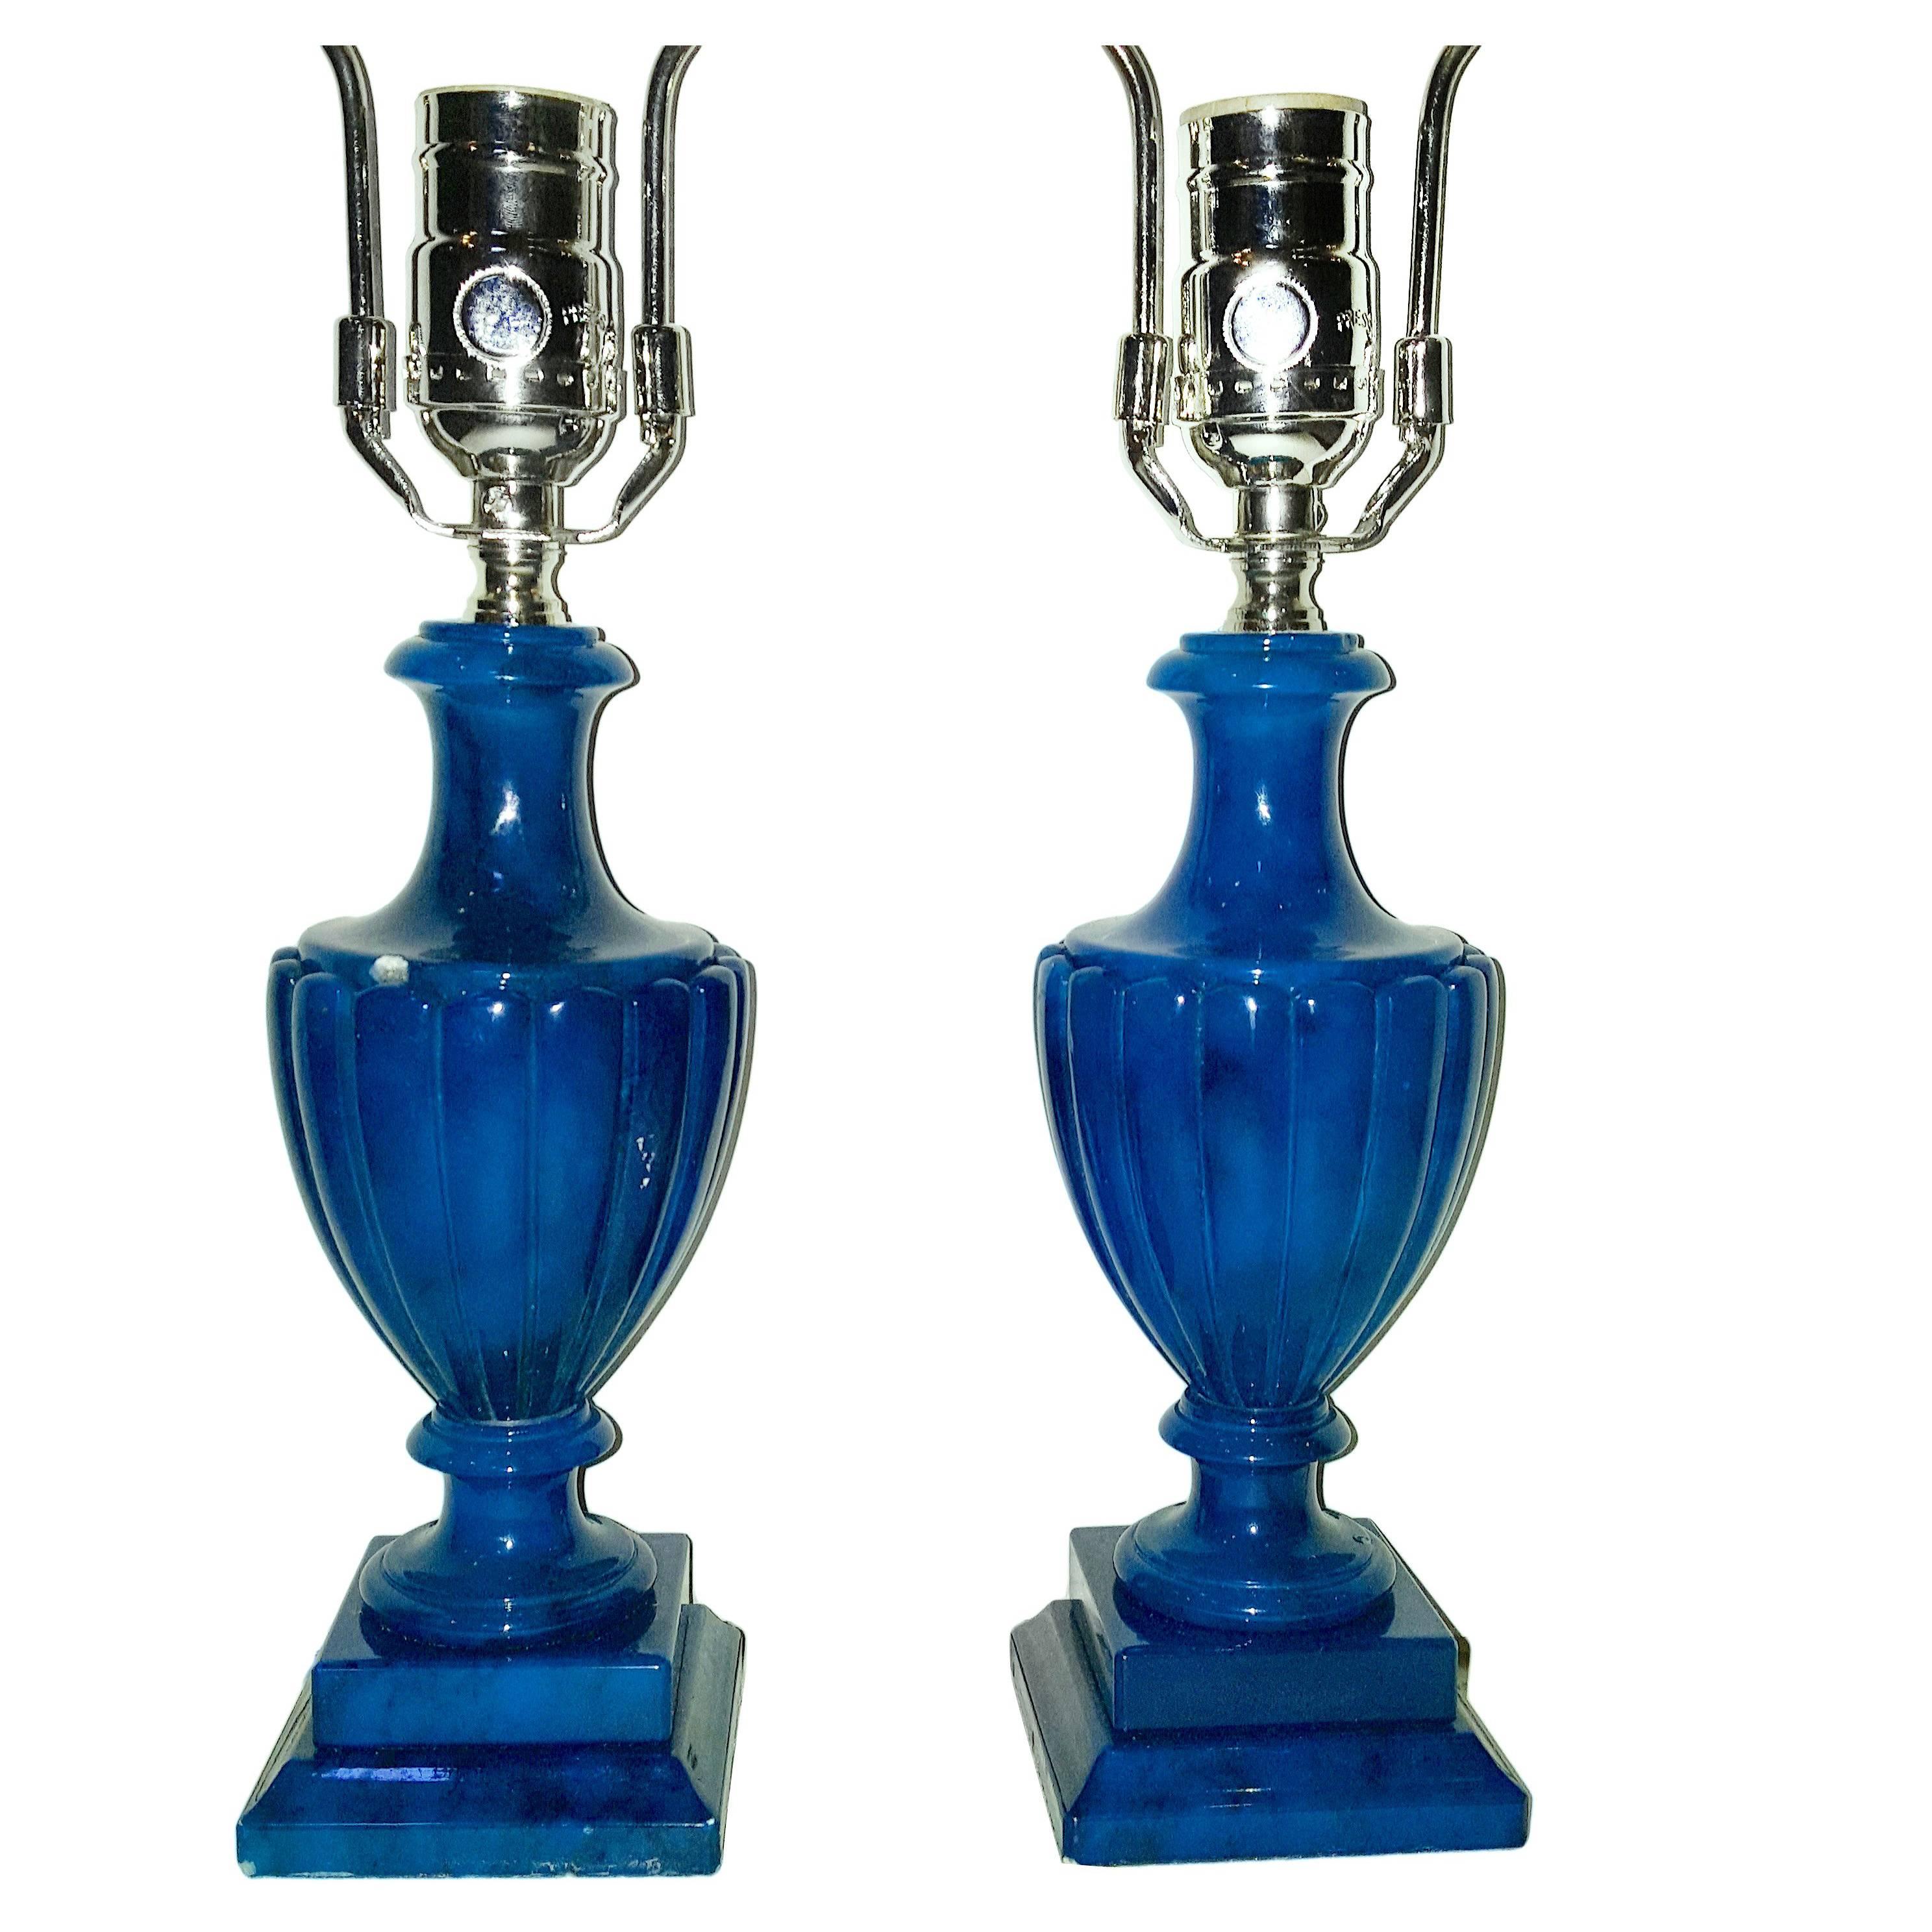 Pair of 1920s Italian blue alabaster table lamps with urn shaped body and pedestal bases.